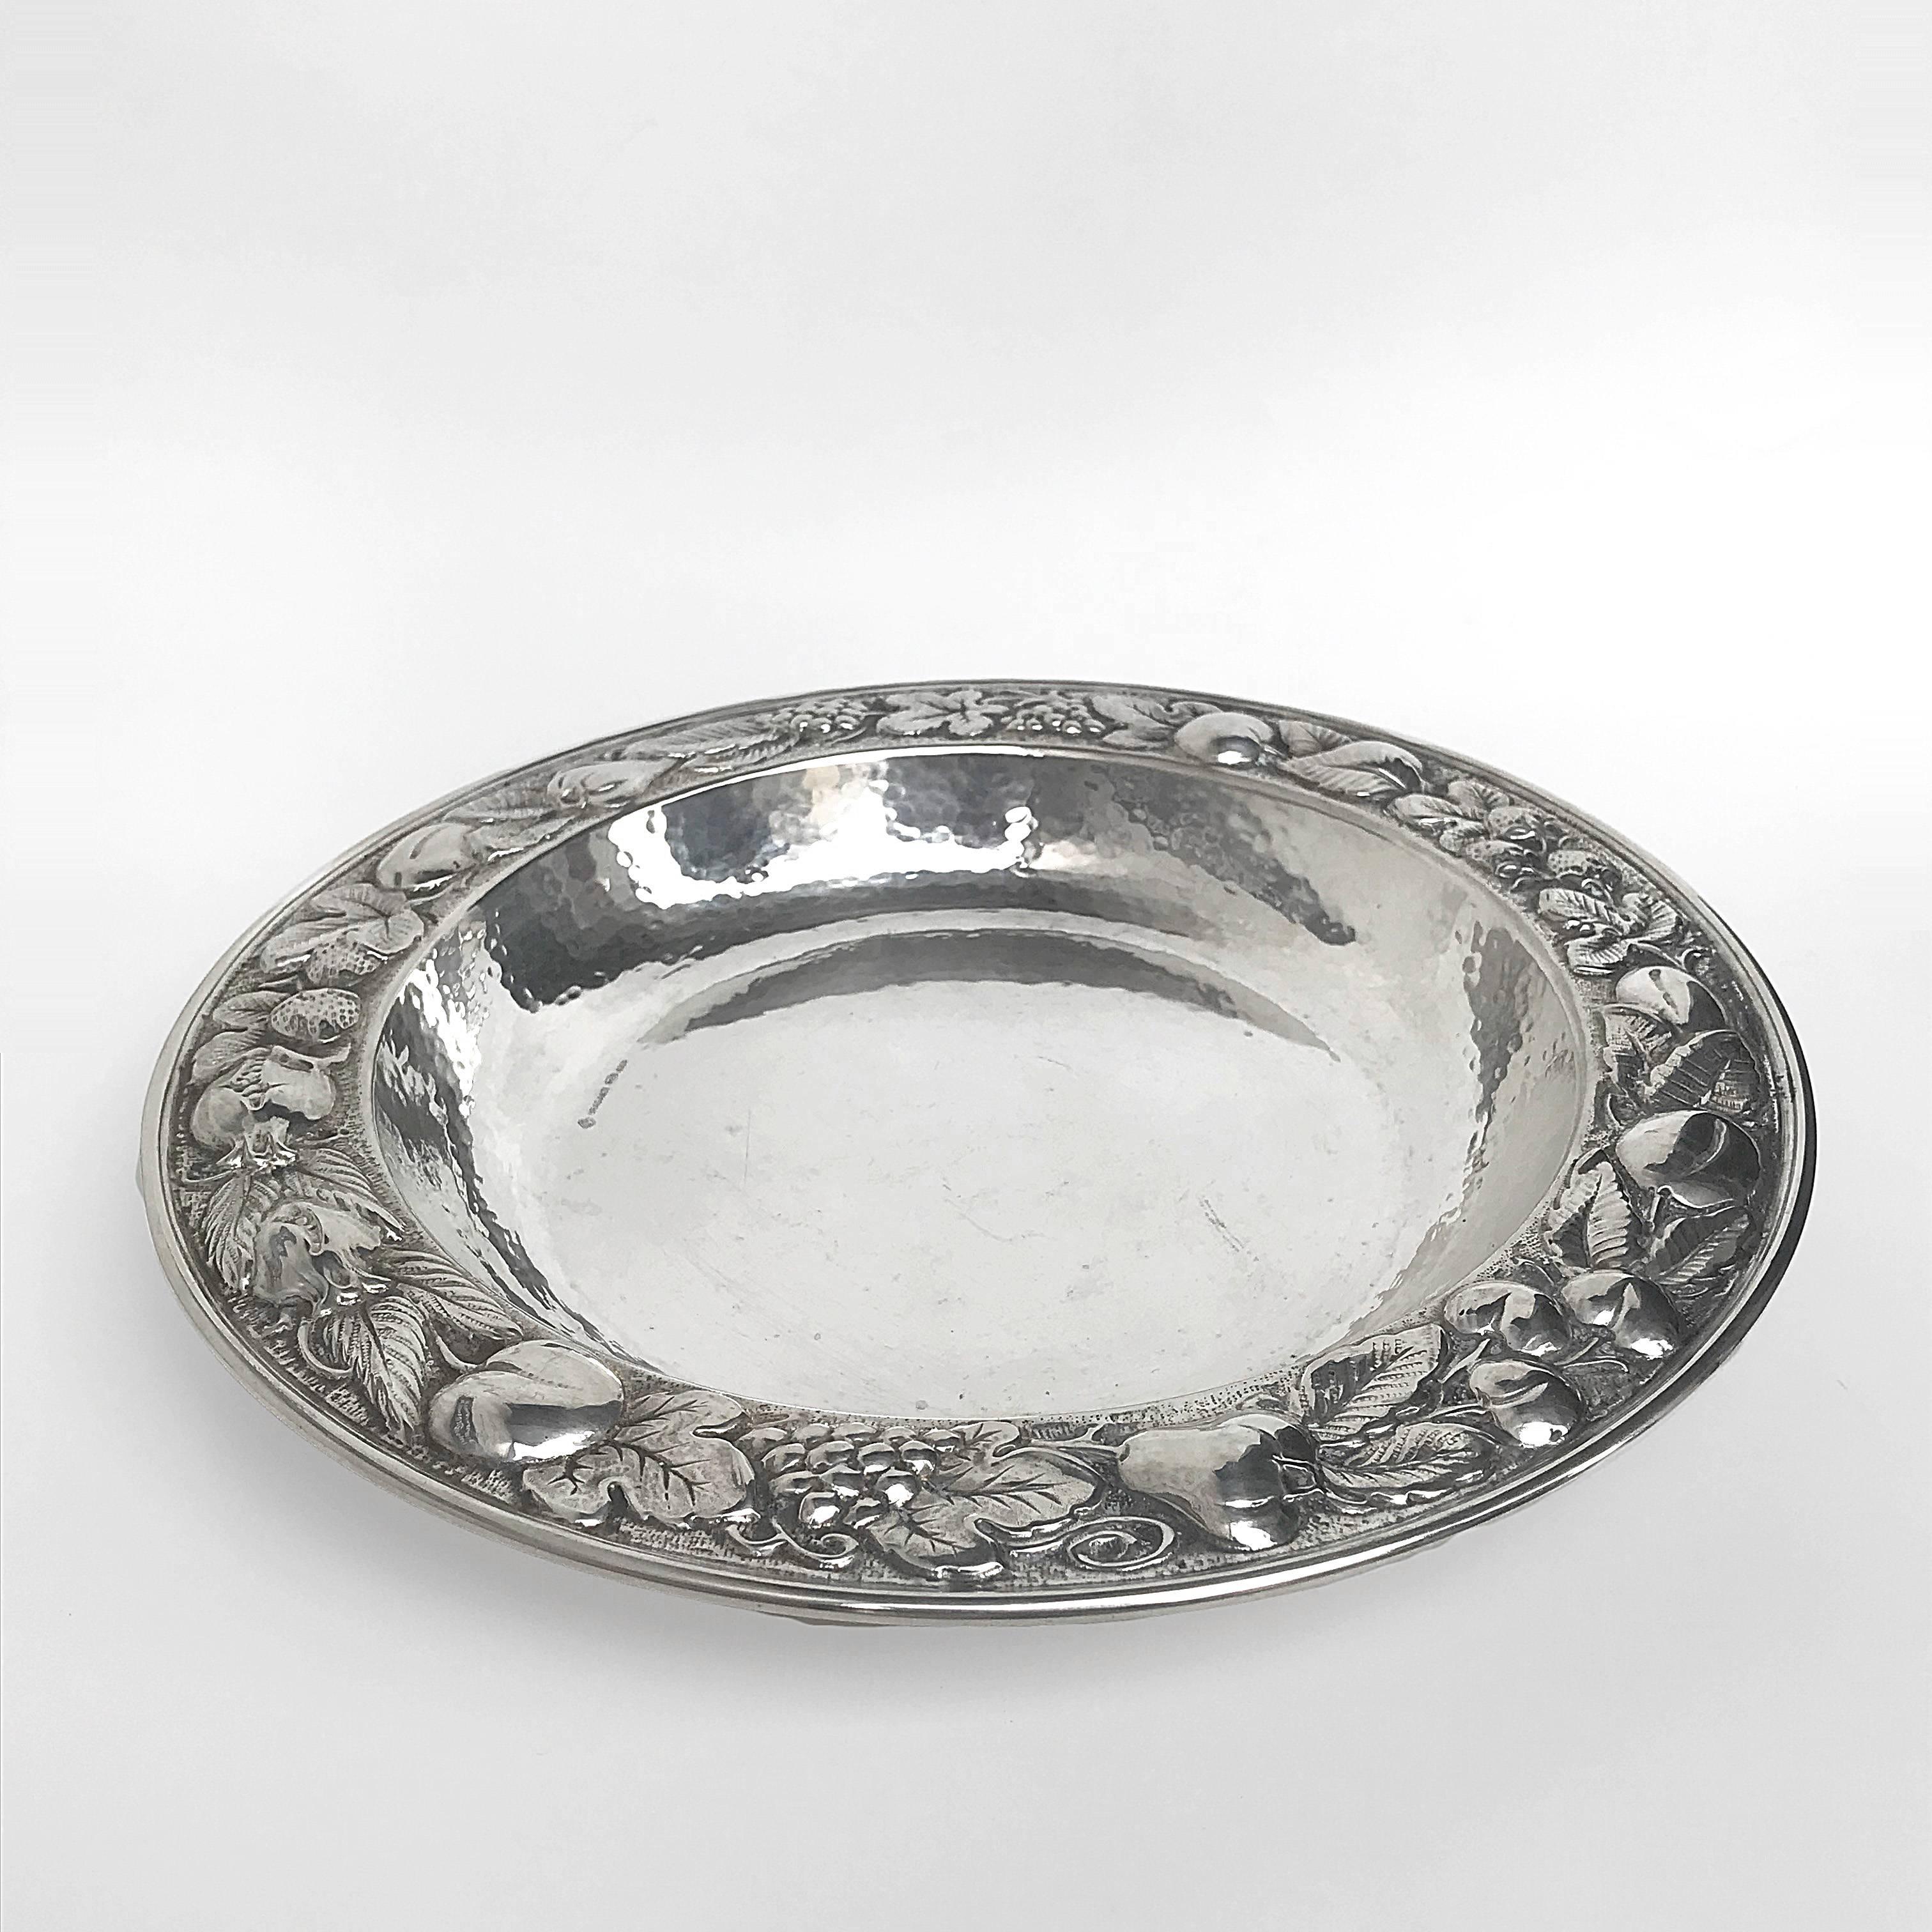 Braganti Handcrafted Bra Sterling Silver Handmade Italian Fruit Centrepiece In Good Condition For Sale In Roma, IT